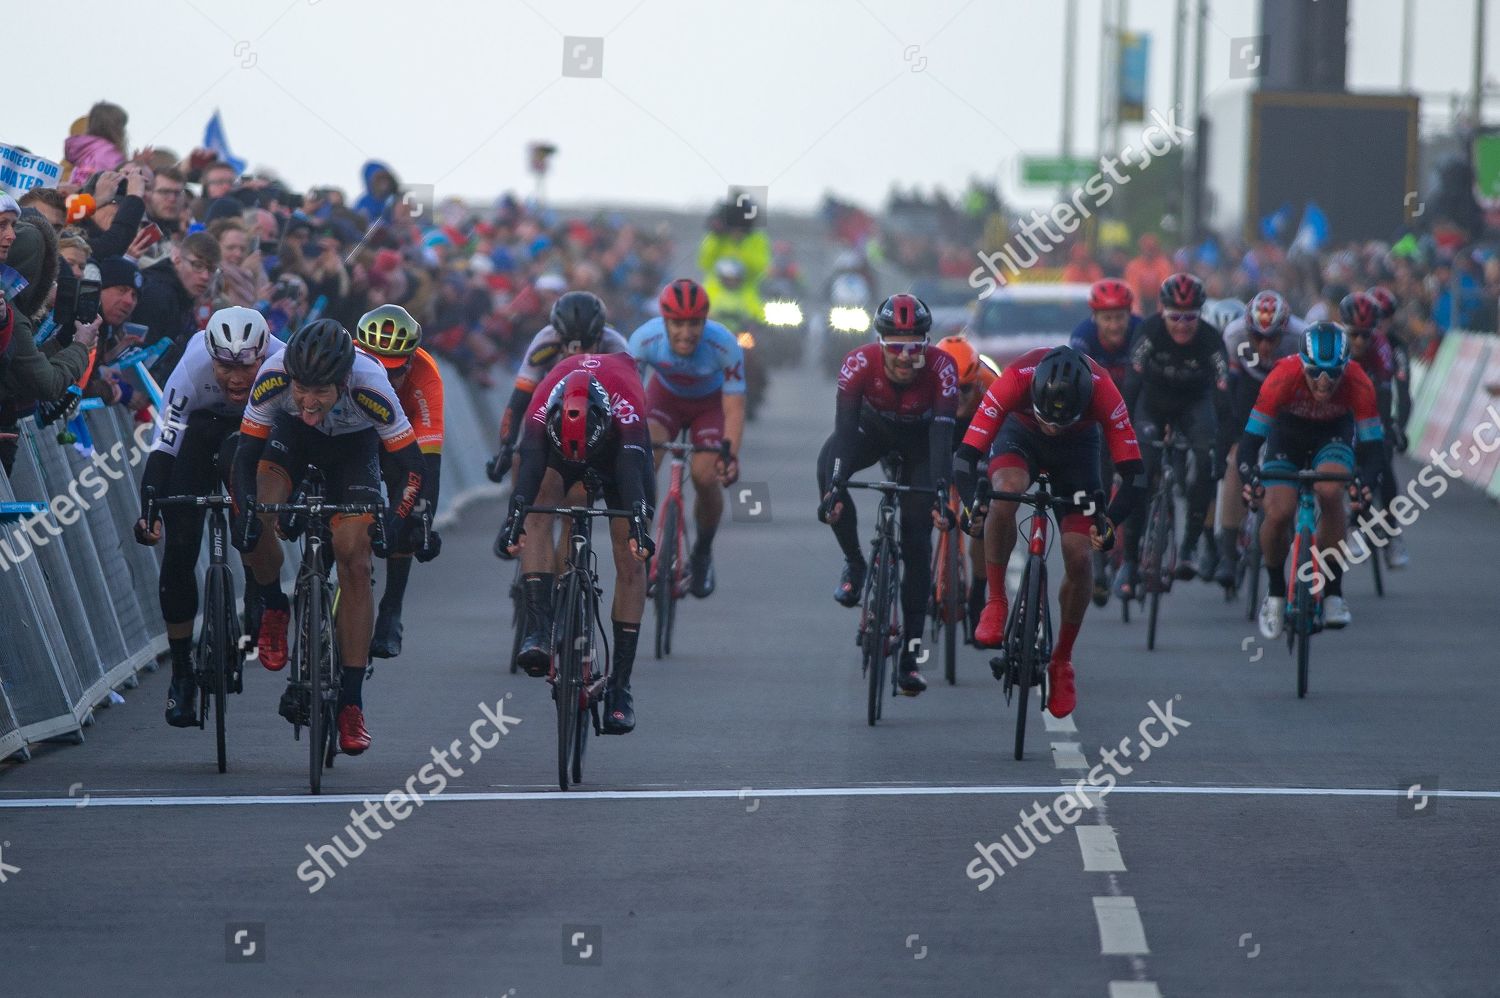 yorkshire cycle race may 2019